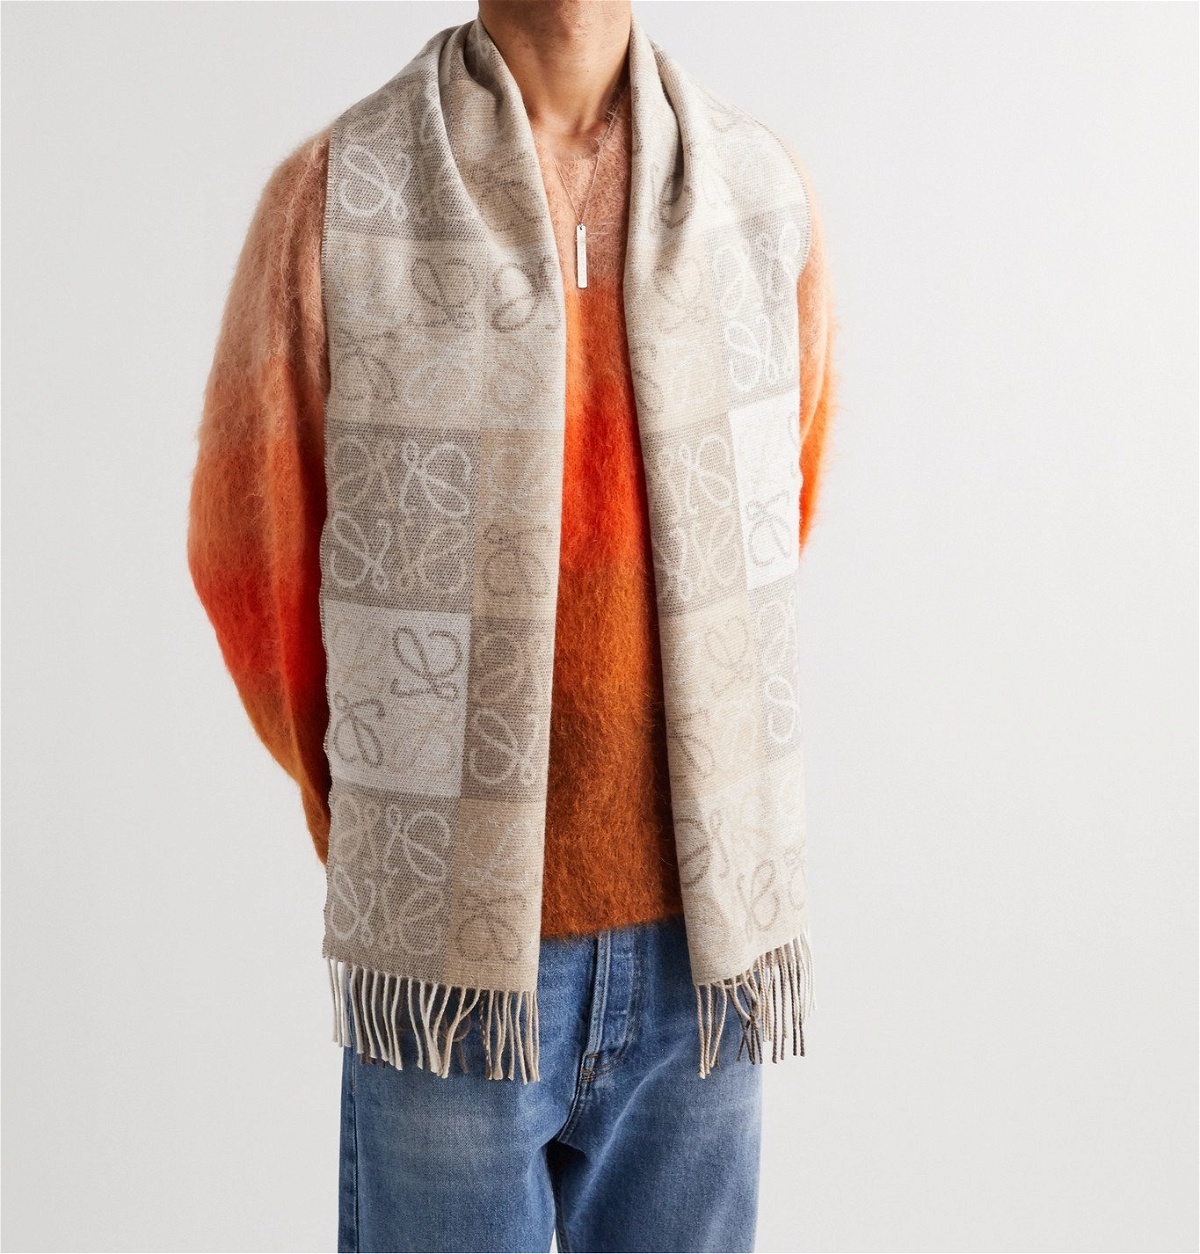 Fringed intarsia wool and cashmere-blend scarf